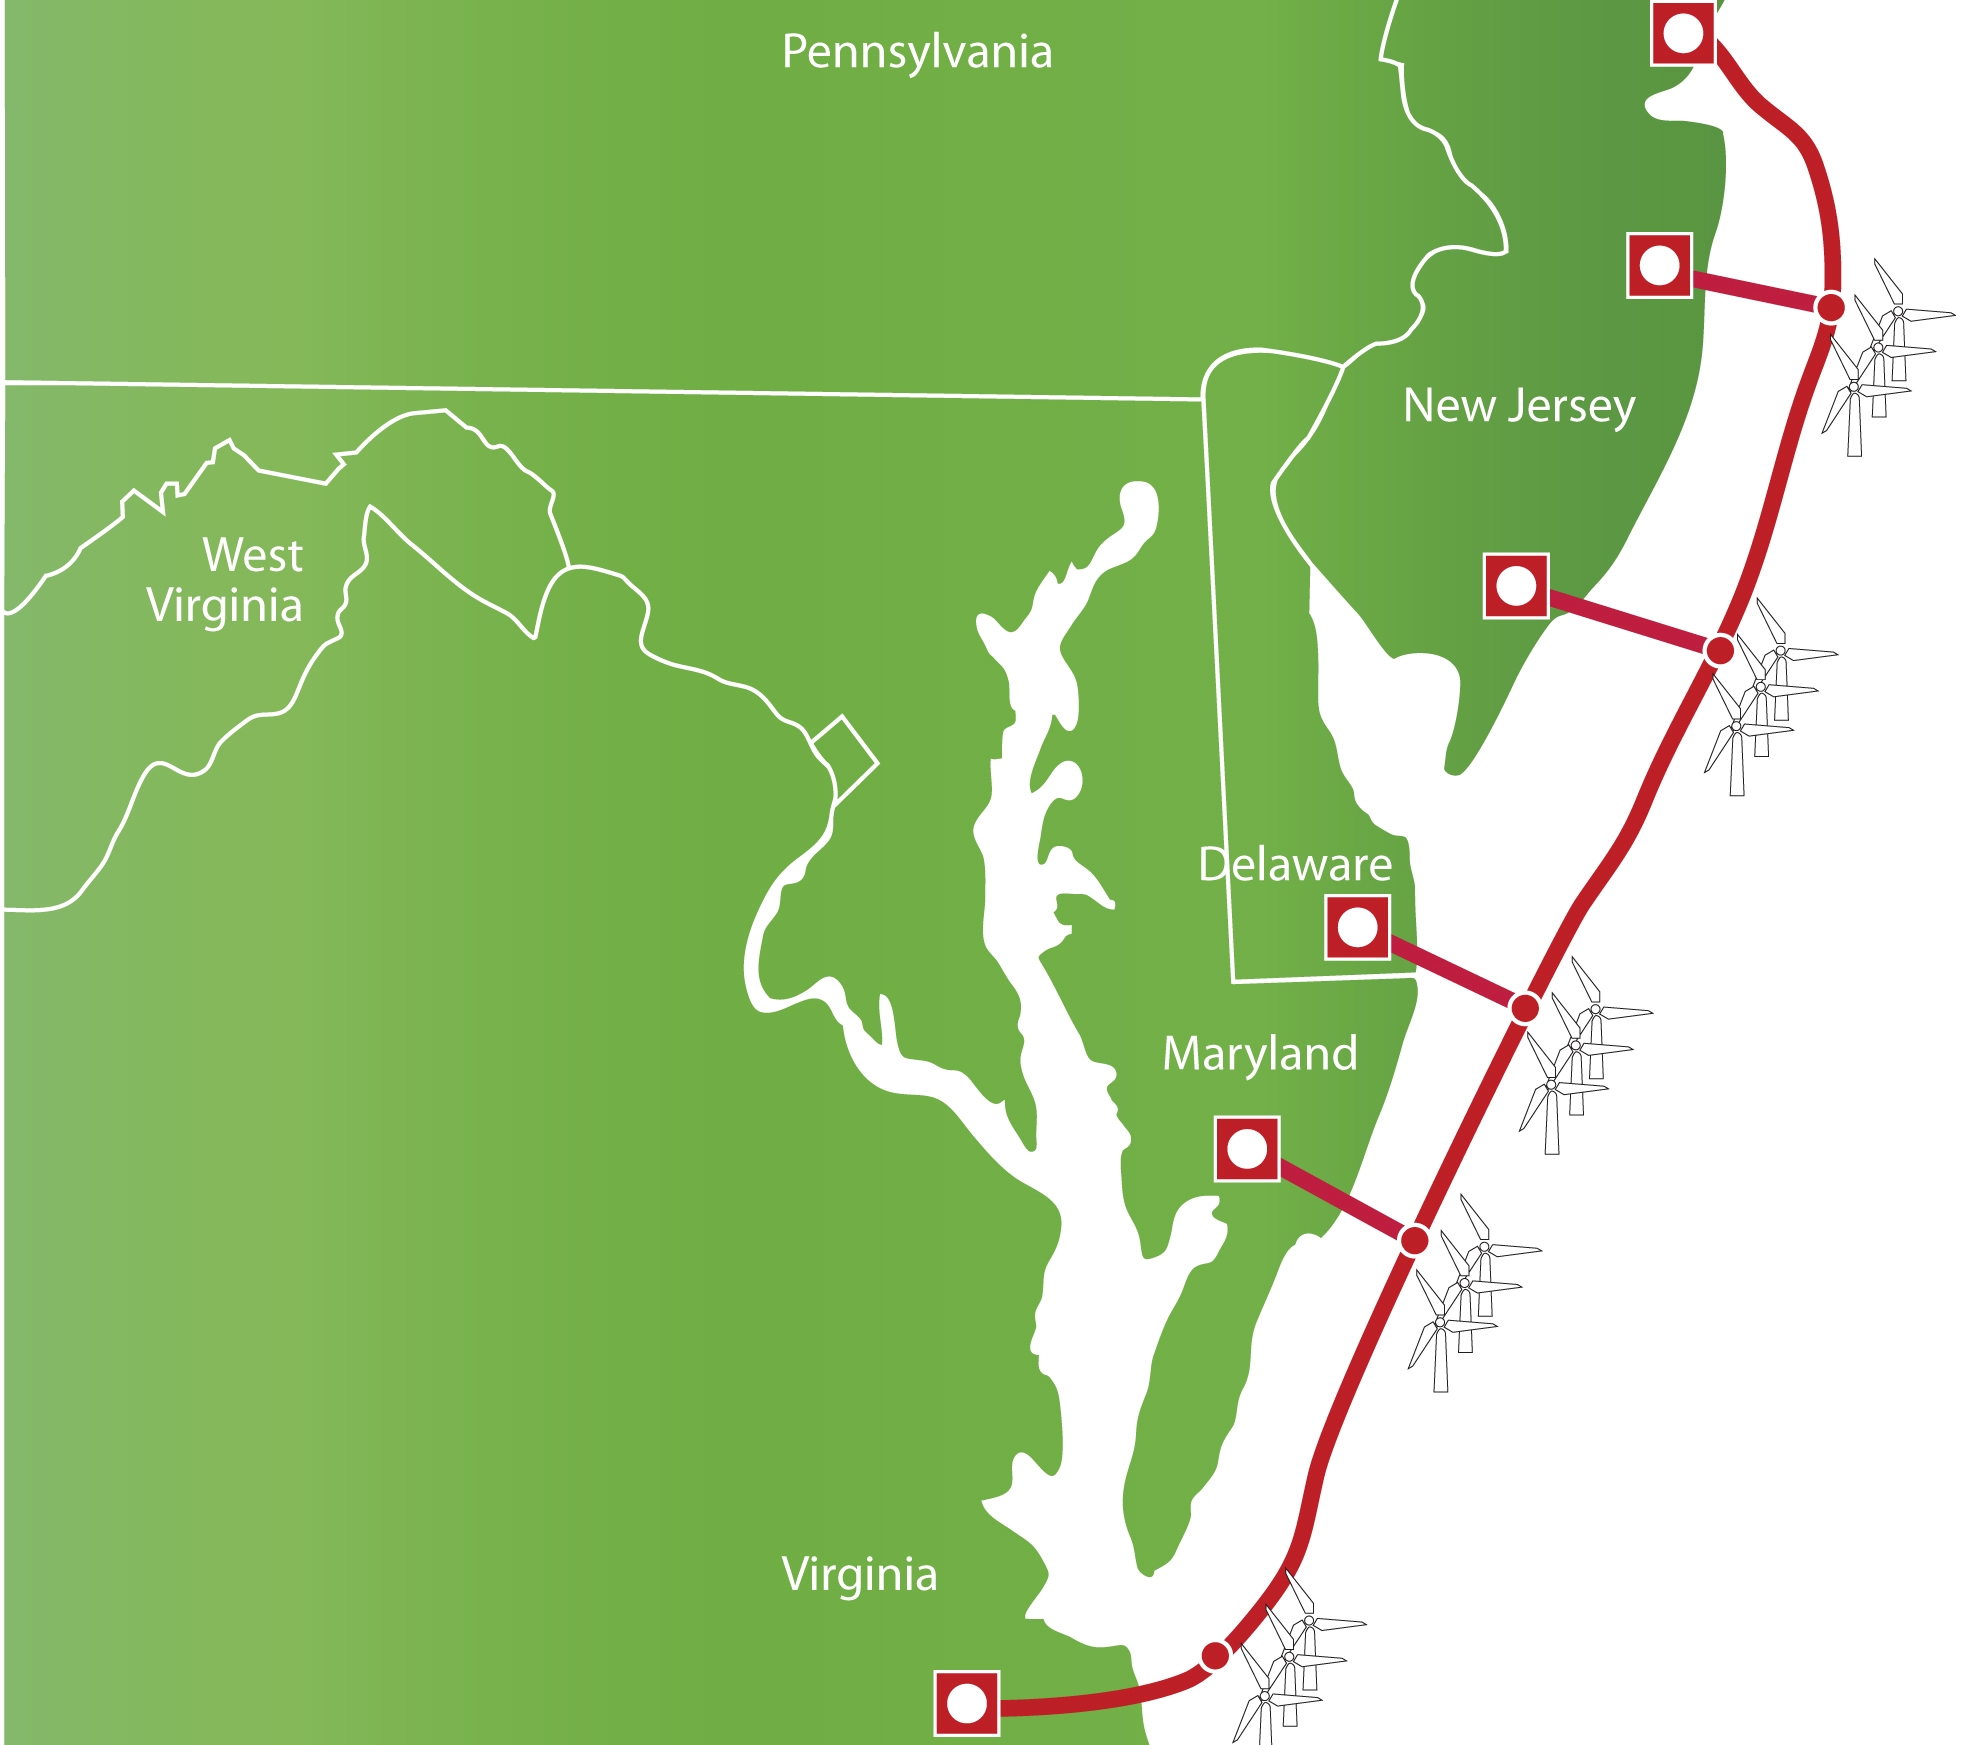 U.S. Ready to Lease Offshore Wind Areas